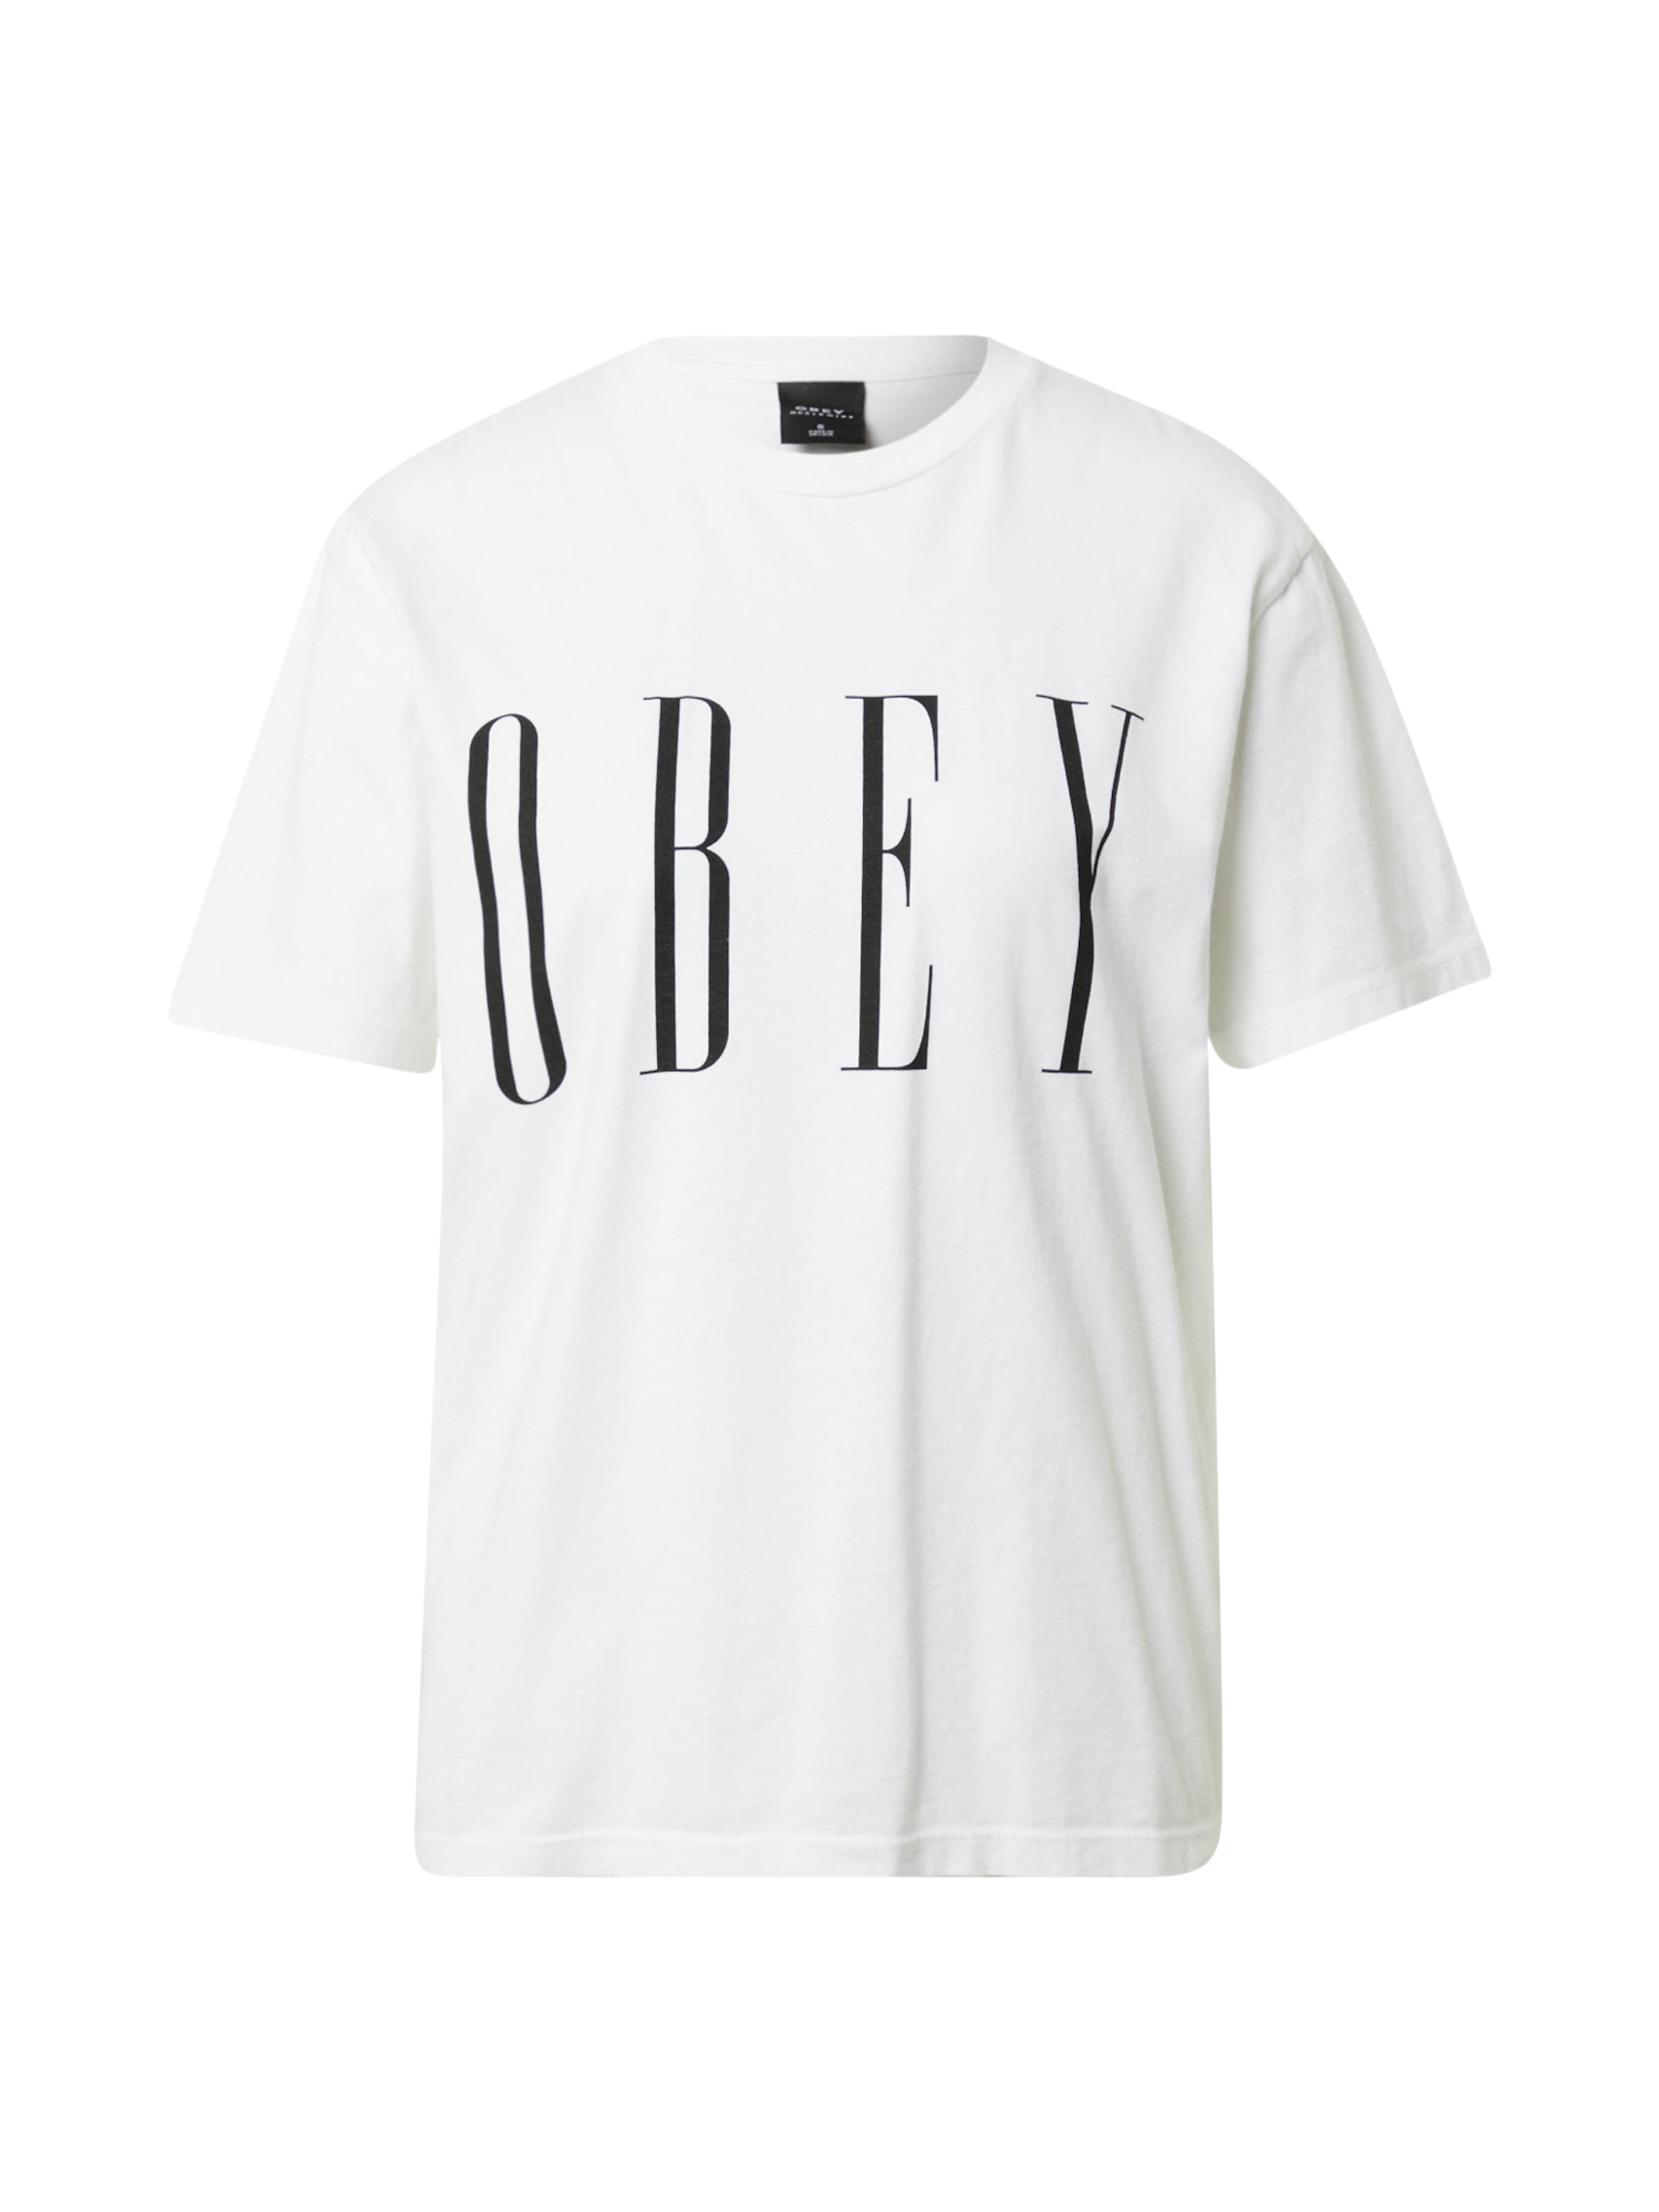 obey t shirt price